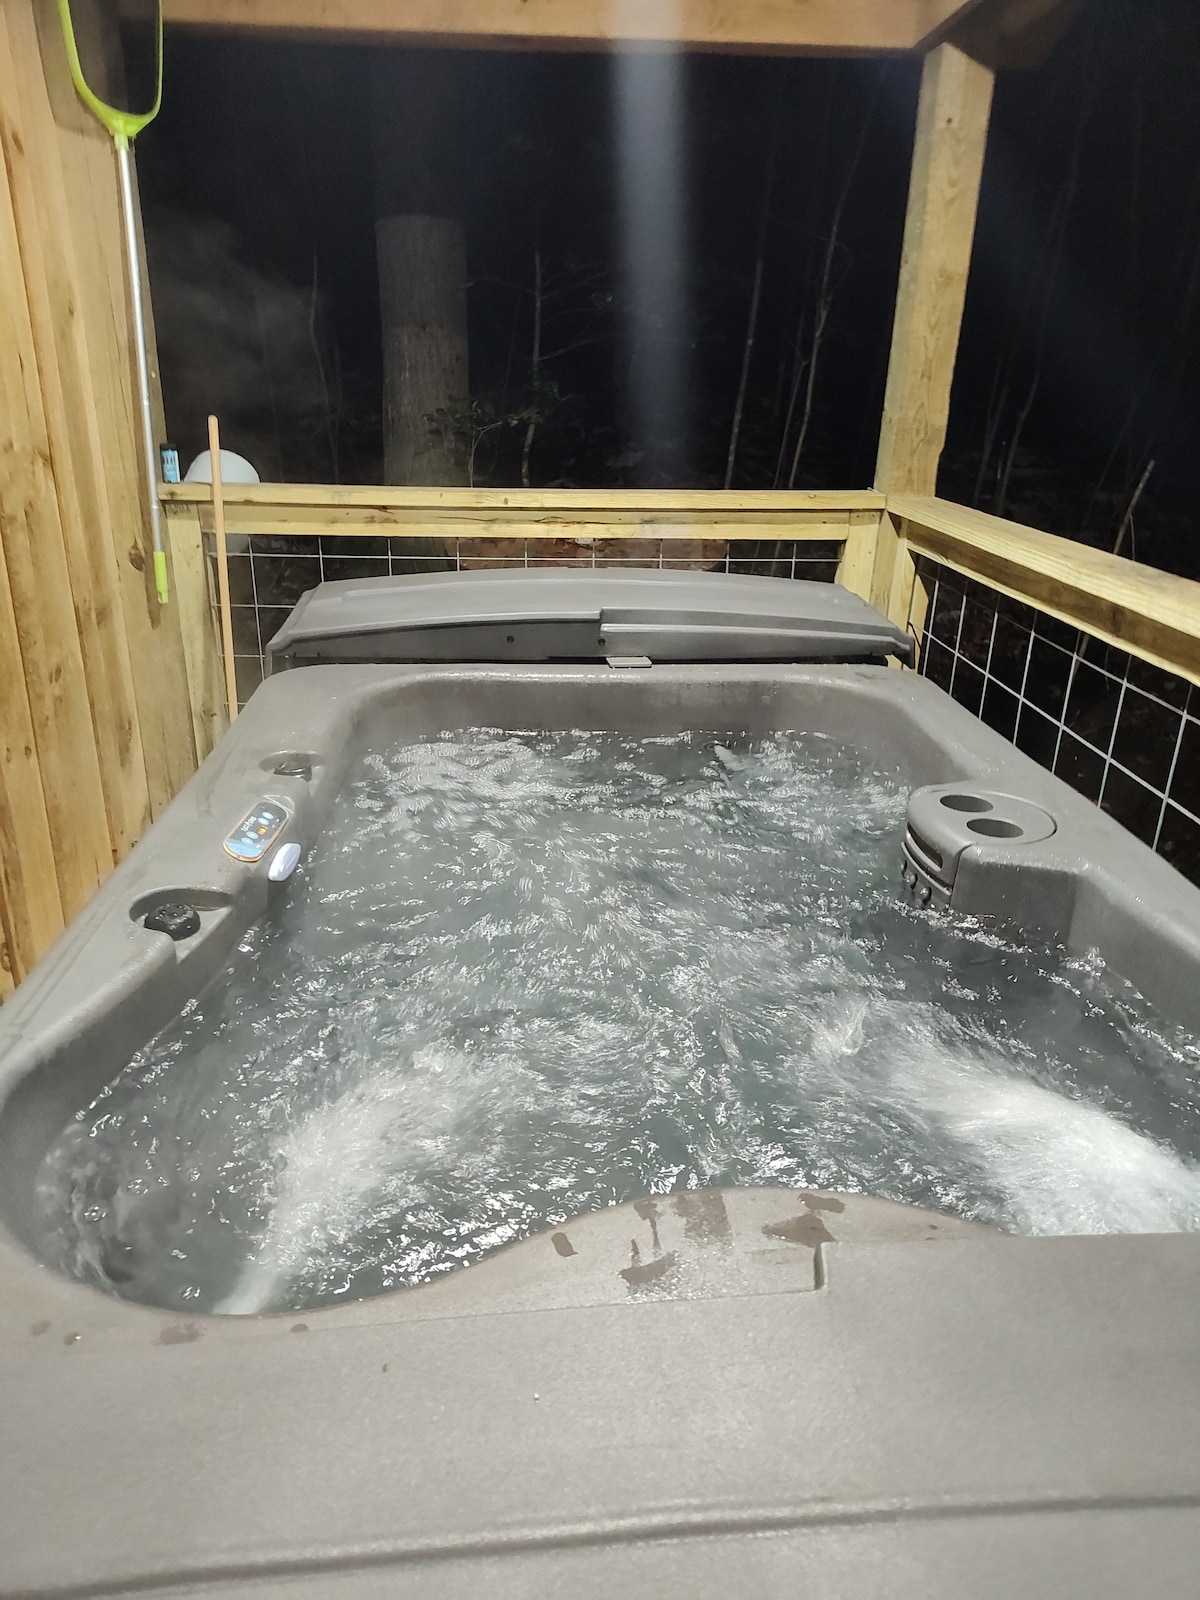 Whispering Pines cabin - New Hot Tub